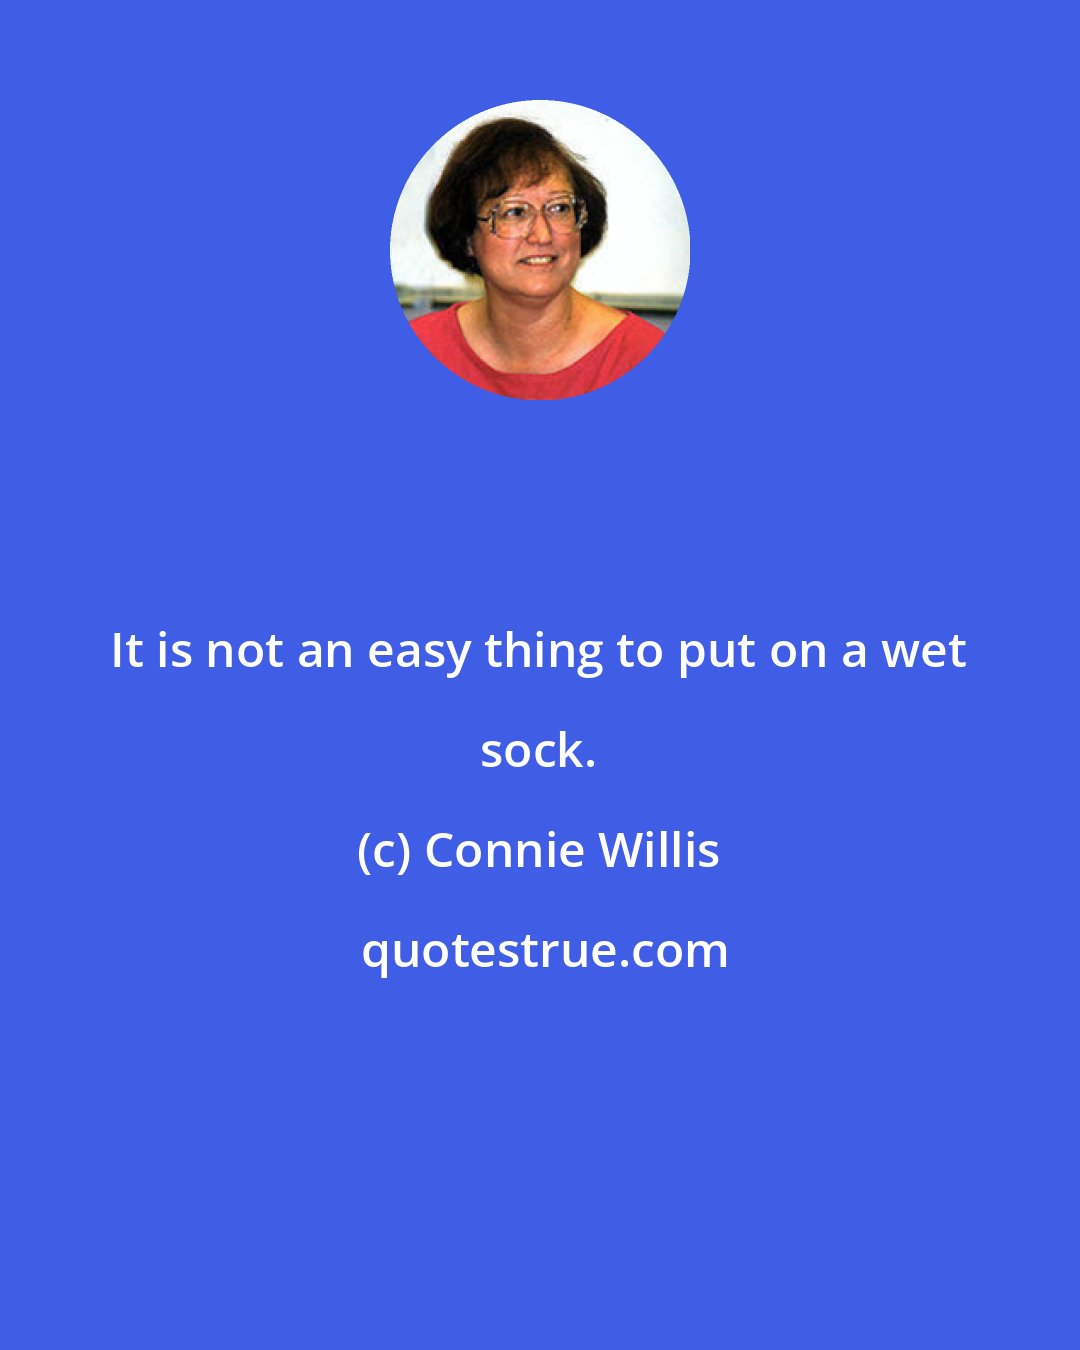 Connie Willis: It is not an easy thing to put on a wet sock.